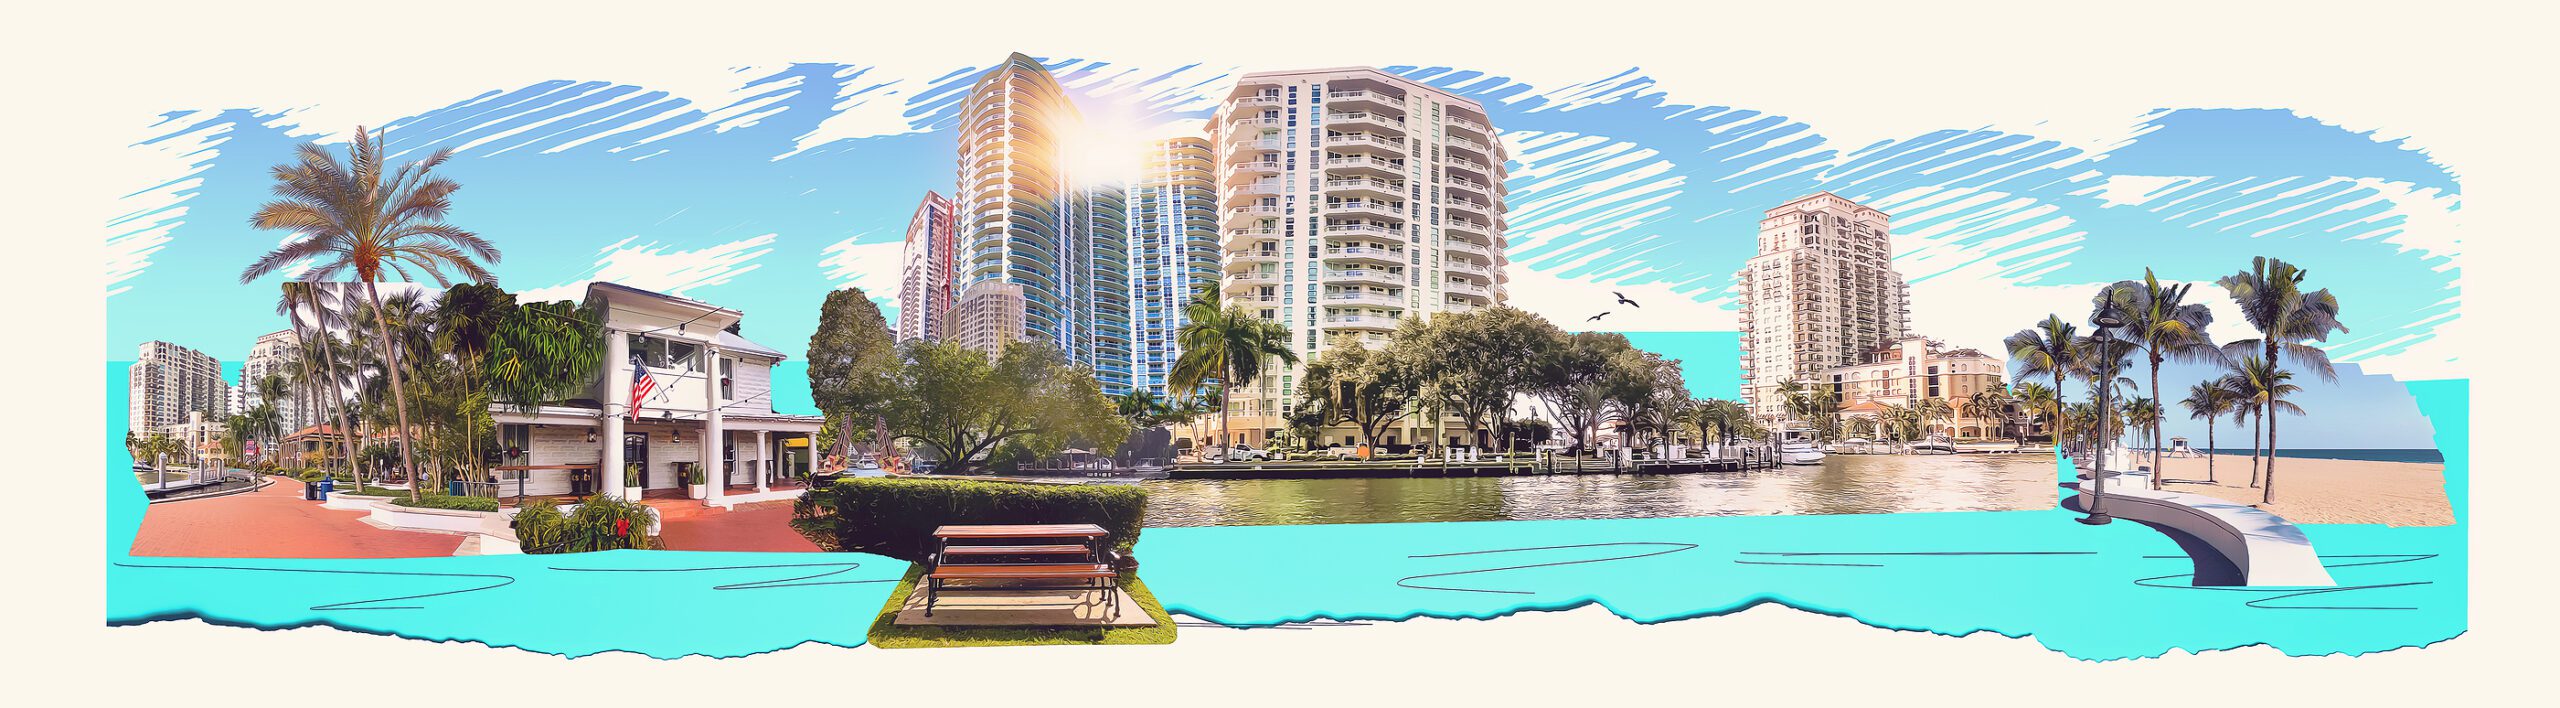 Cityscape of Ft. Lauderdale, Florida showing the beach, yachts and condominiums - art collage or design